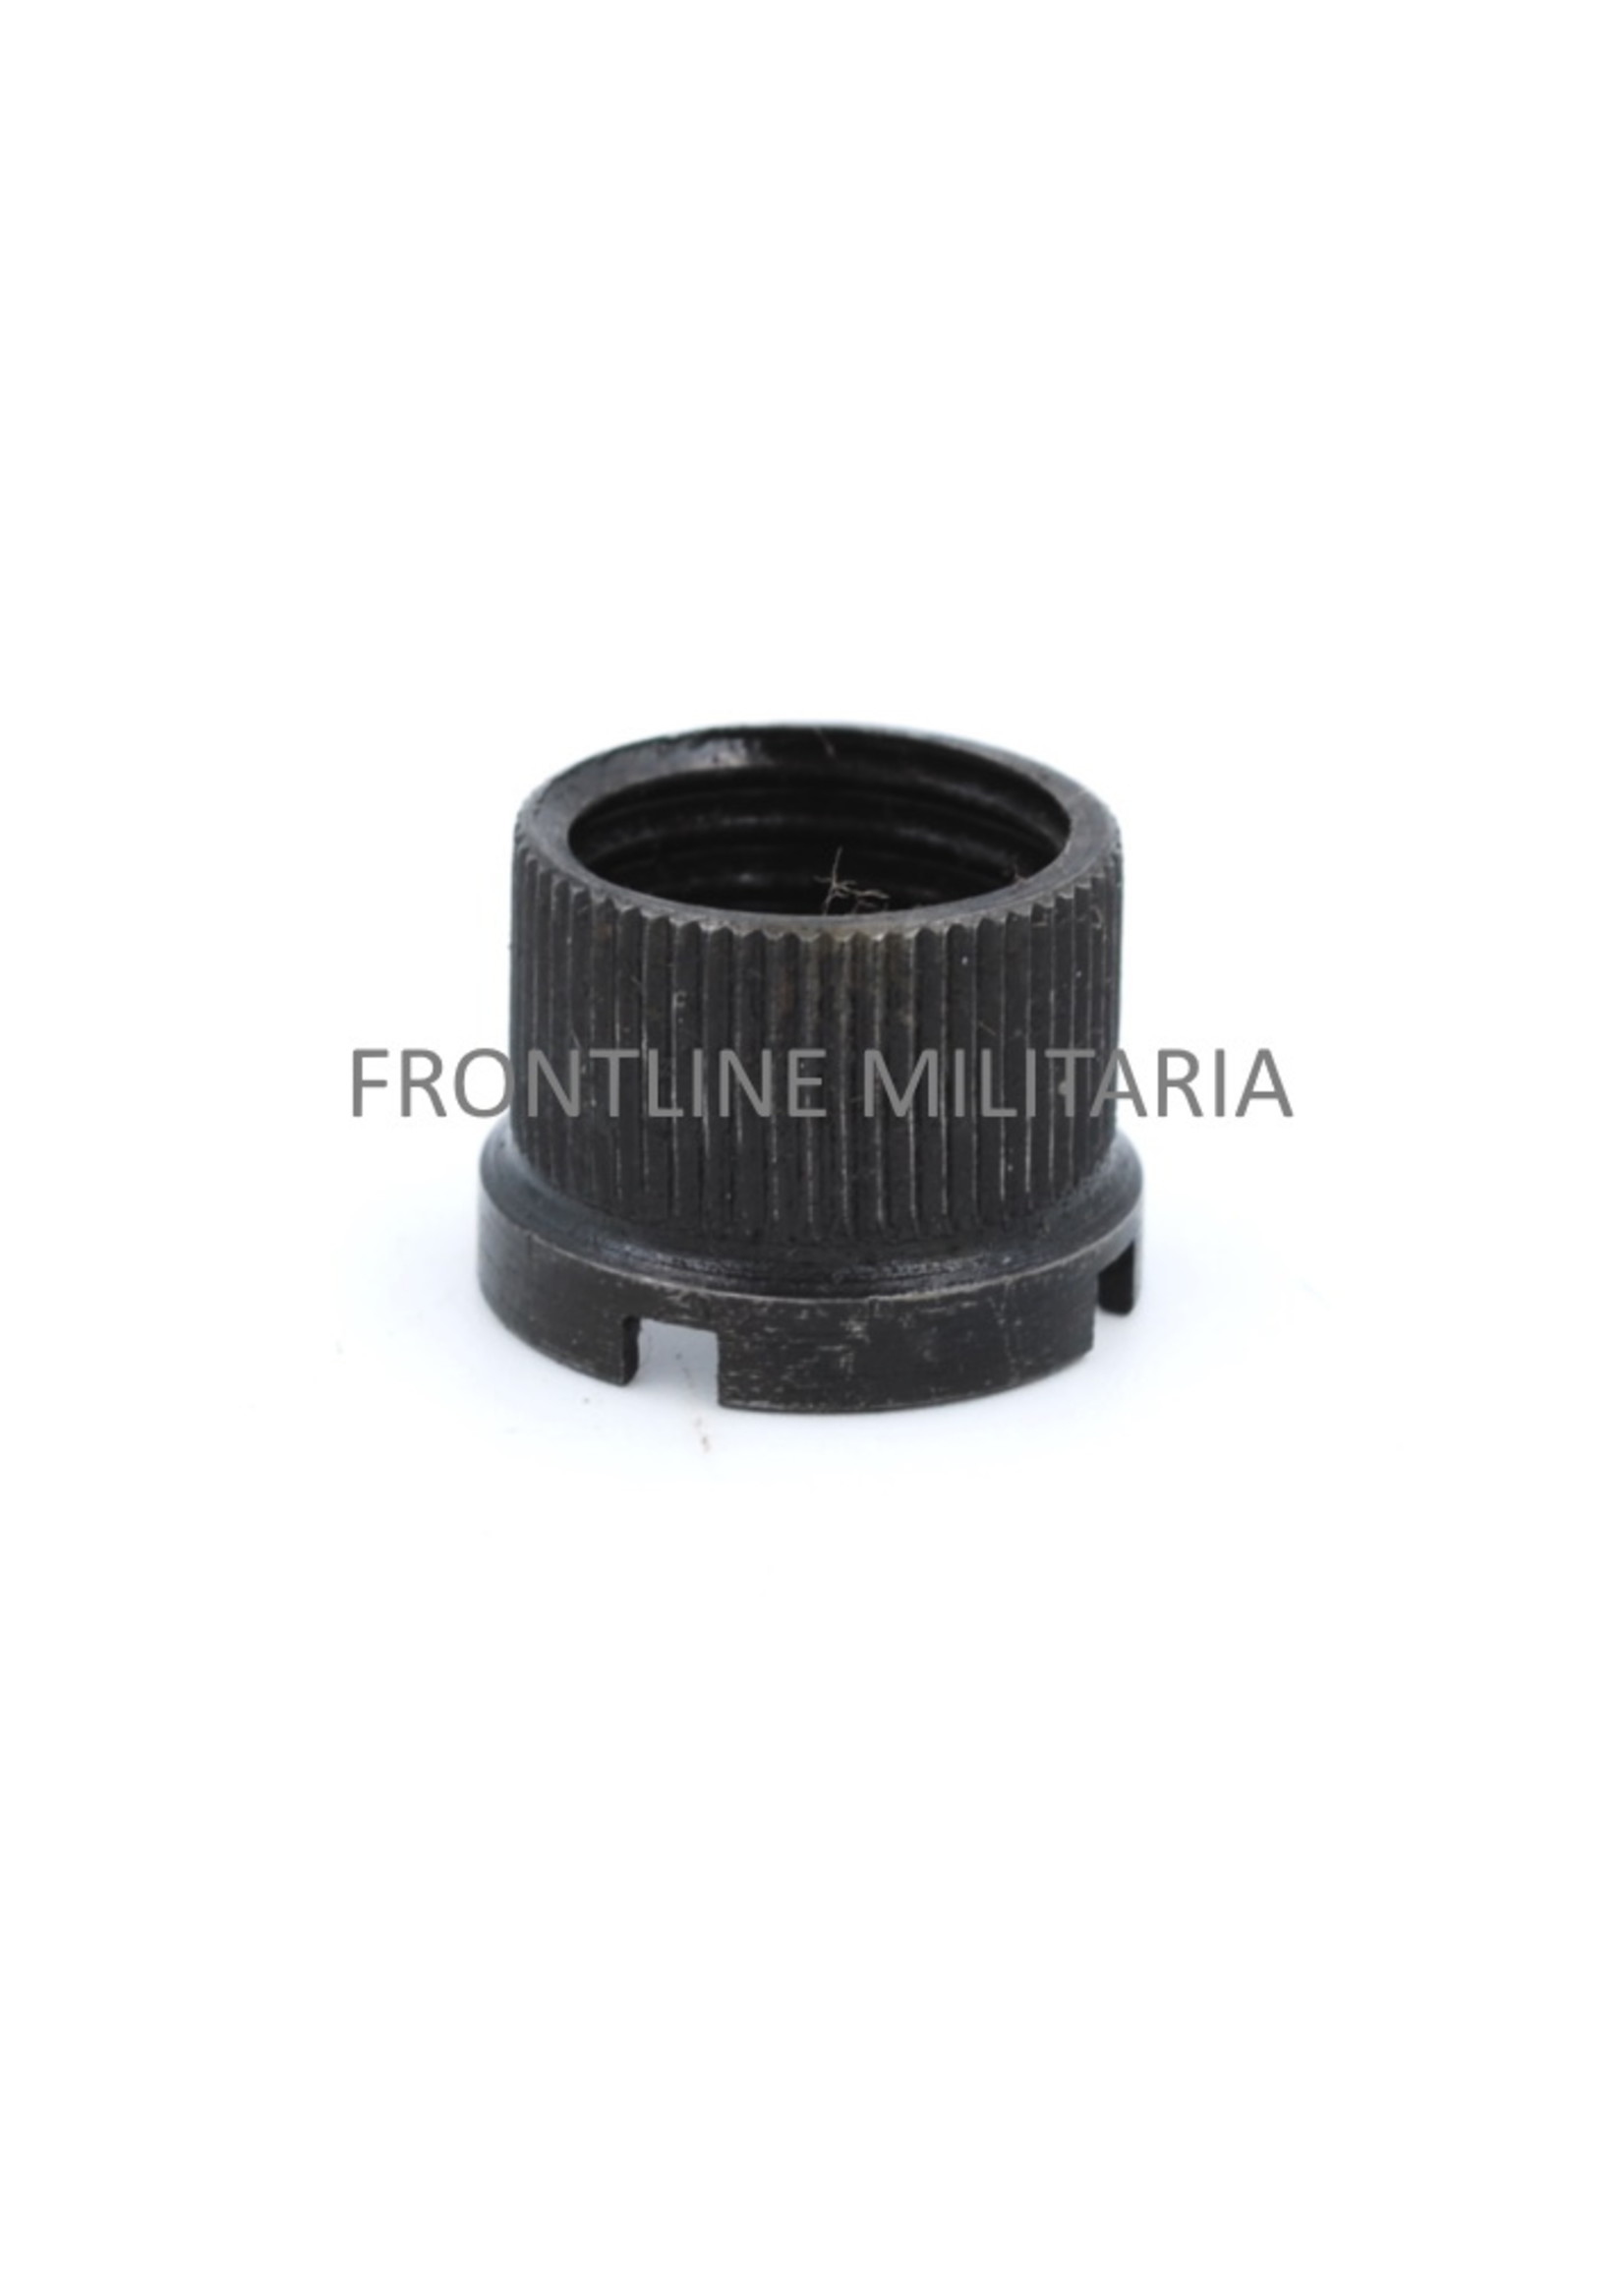 Muzzle nut for the G43 and K43 Rifle